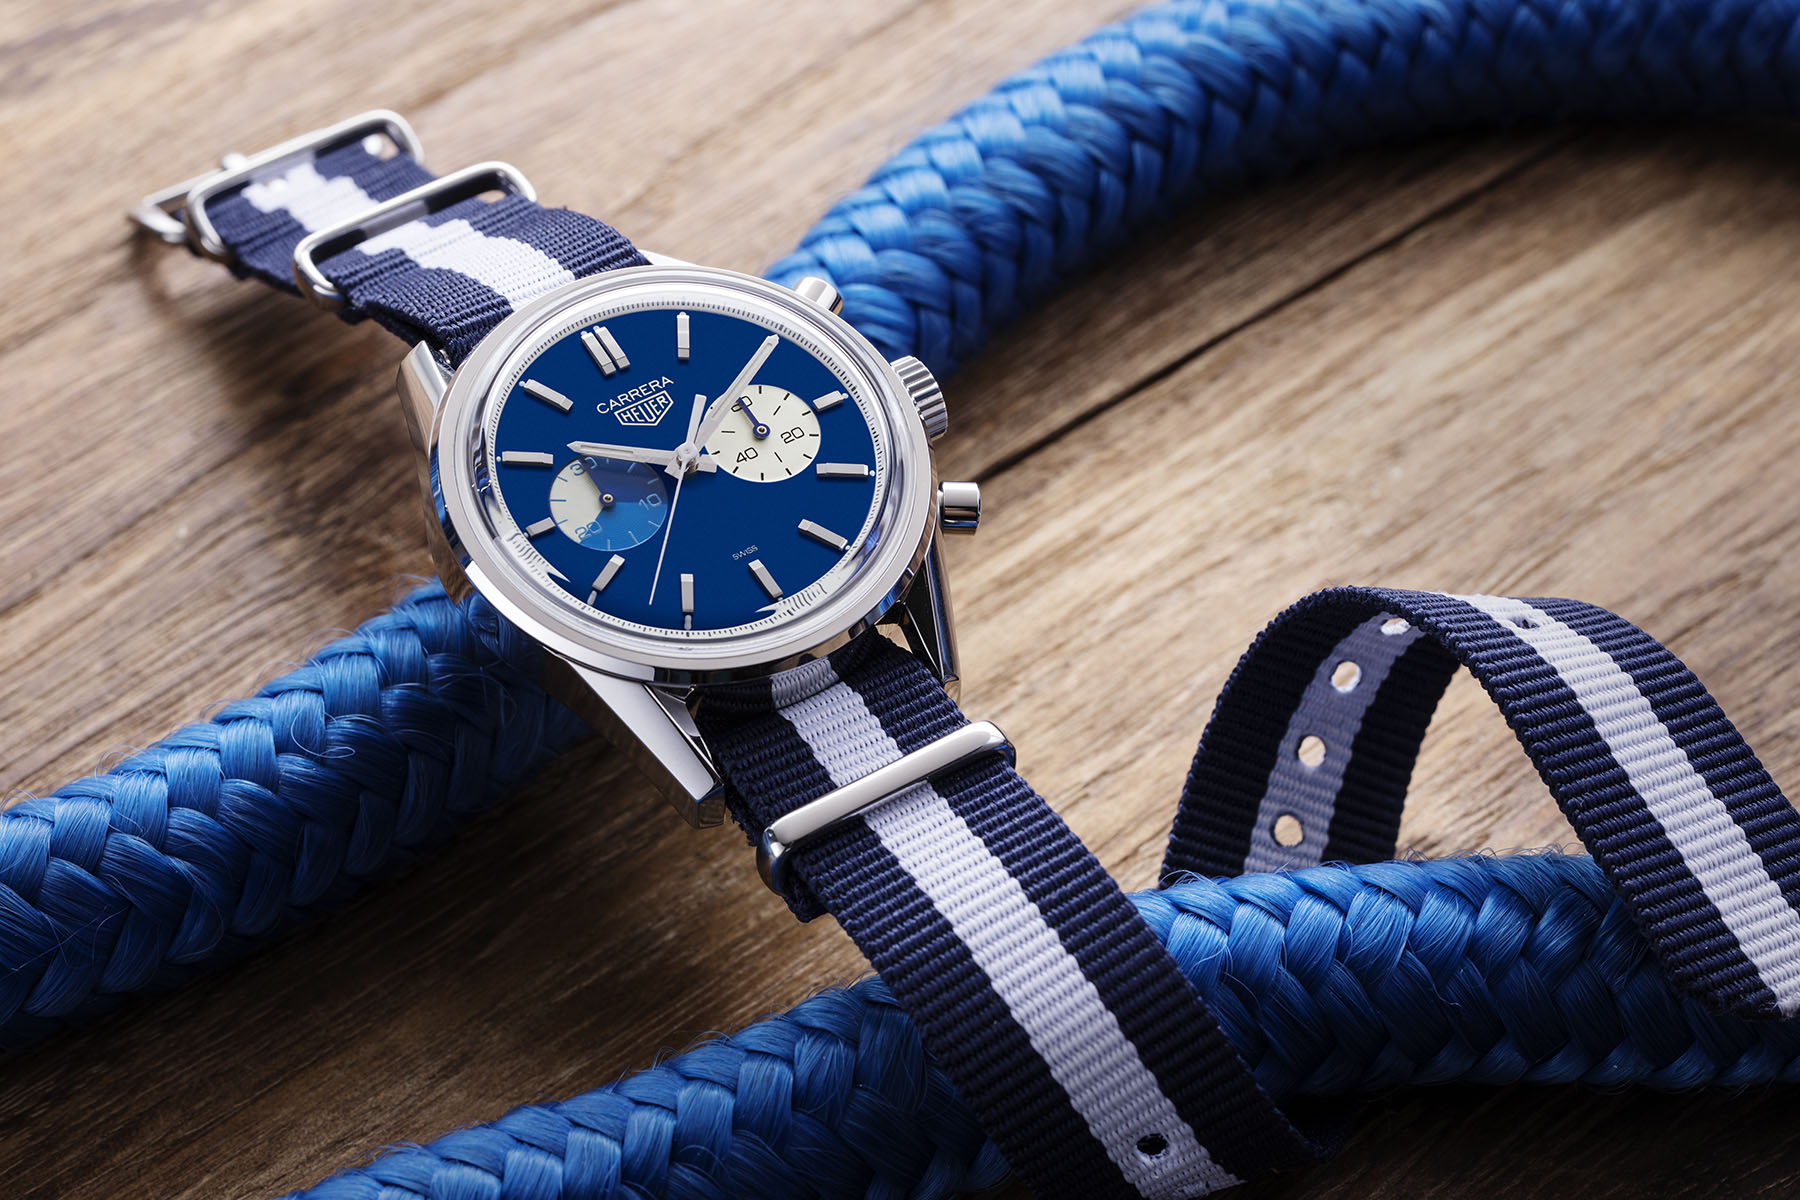 TAG Heuer's Carrera Watches Live Up to their Legacy - Revolution Watch